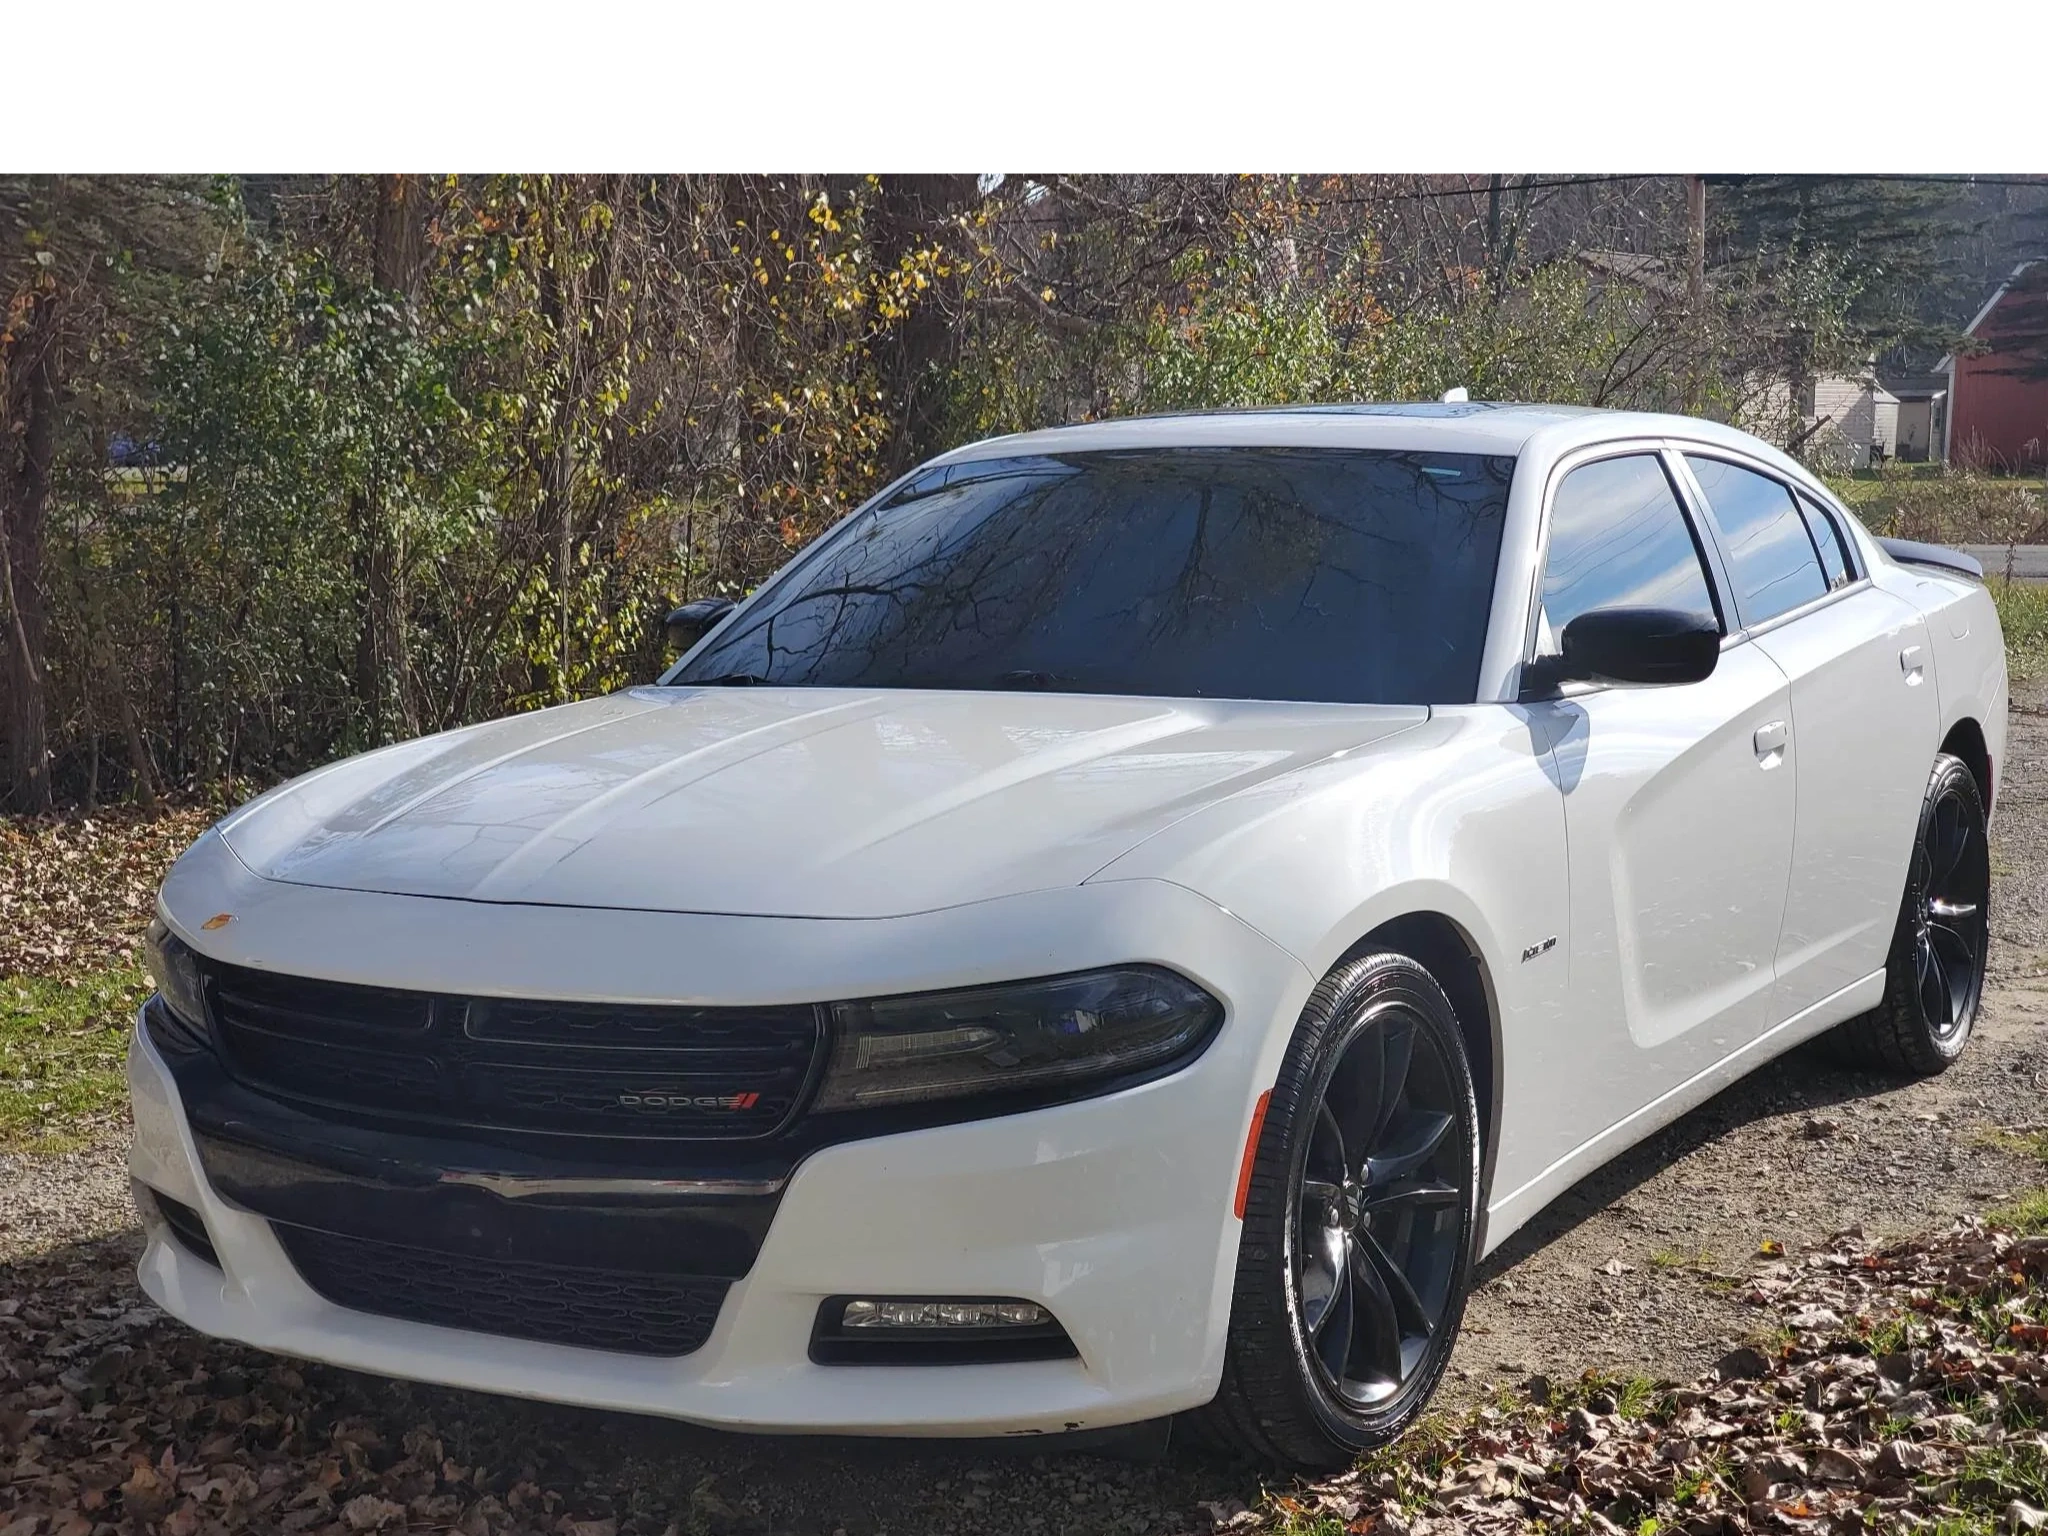 Allen Hill's 2017 Dodge Charger RT